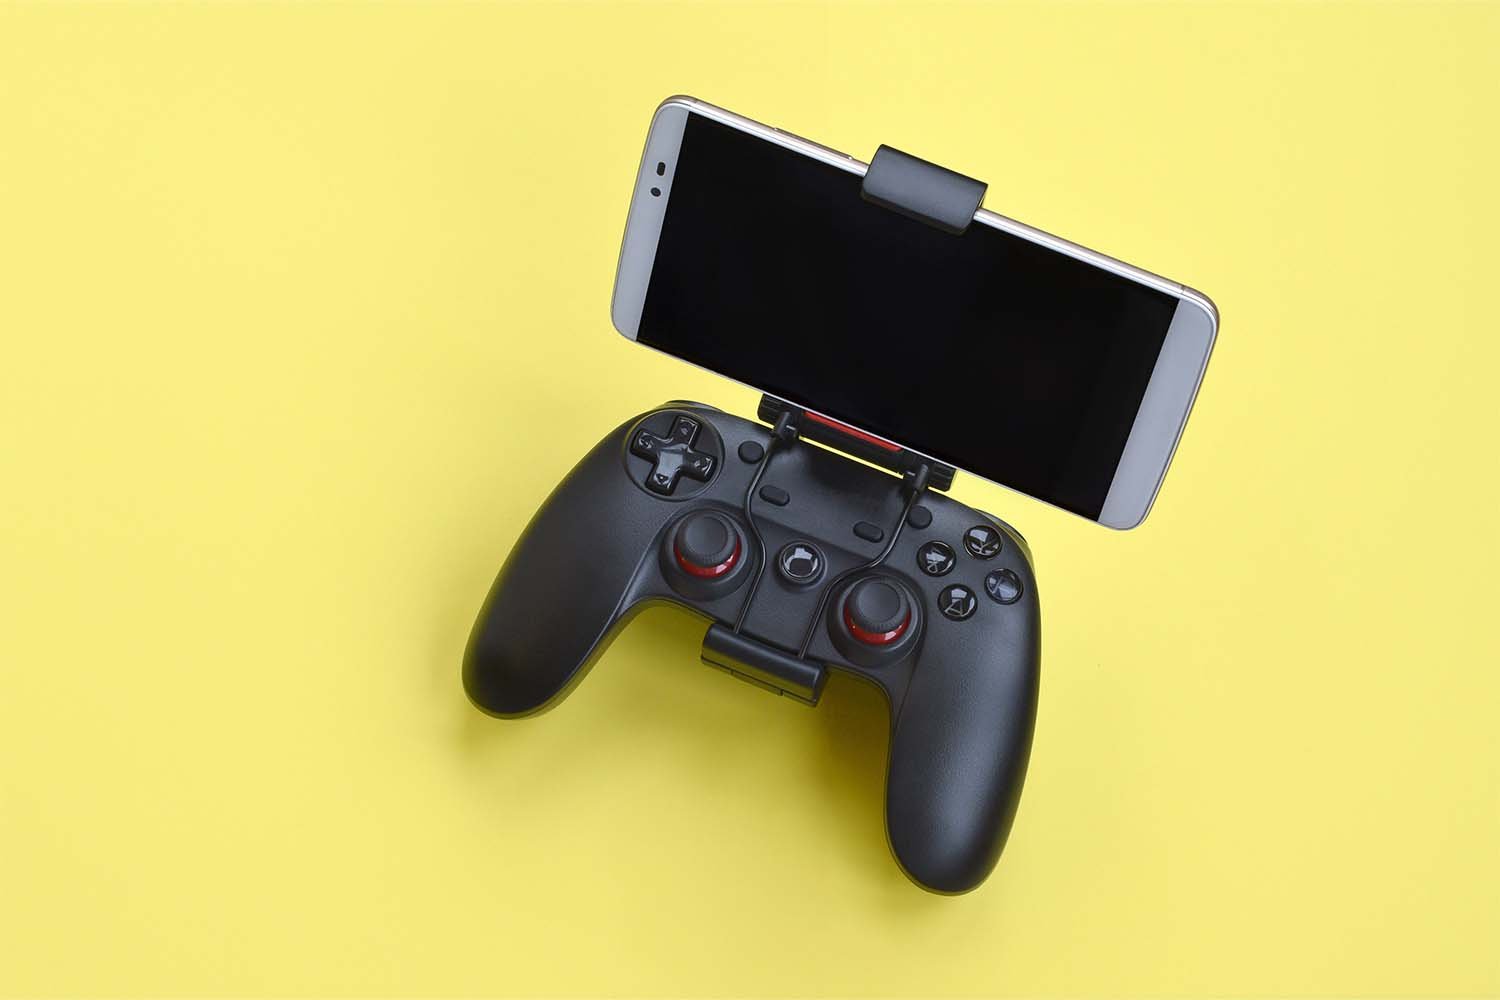 flyde over chance Tragisk The 8 Best Mobile Gaming Accessories for 2022 | WTFast — WTFast Blog